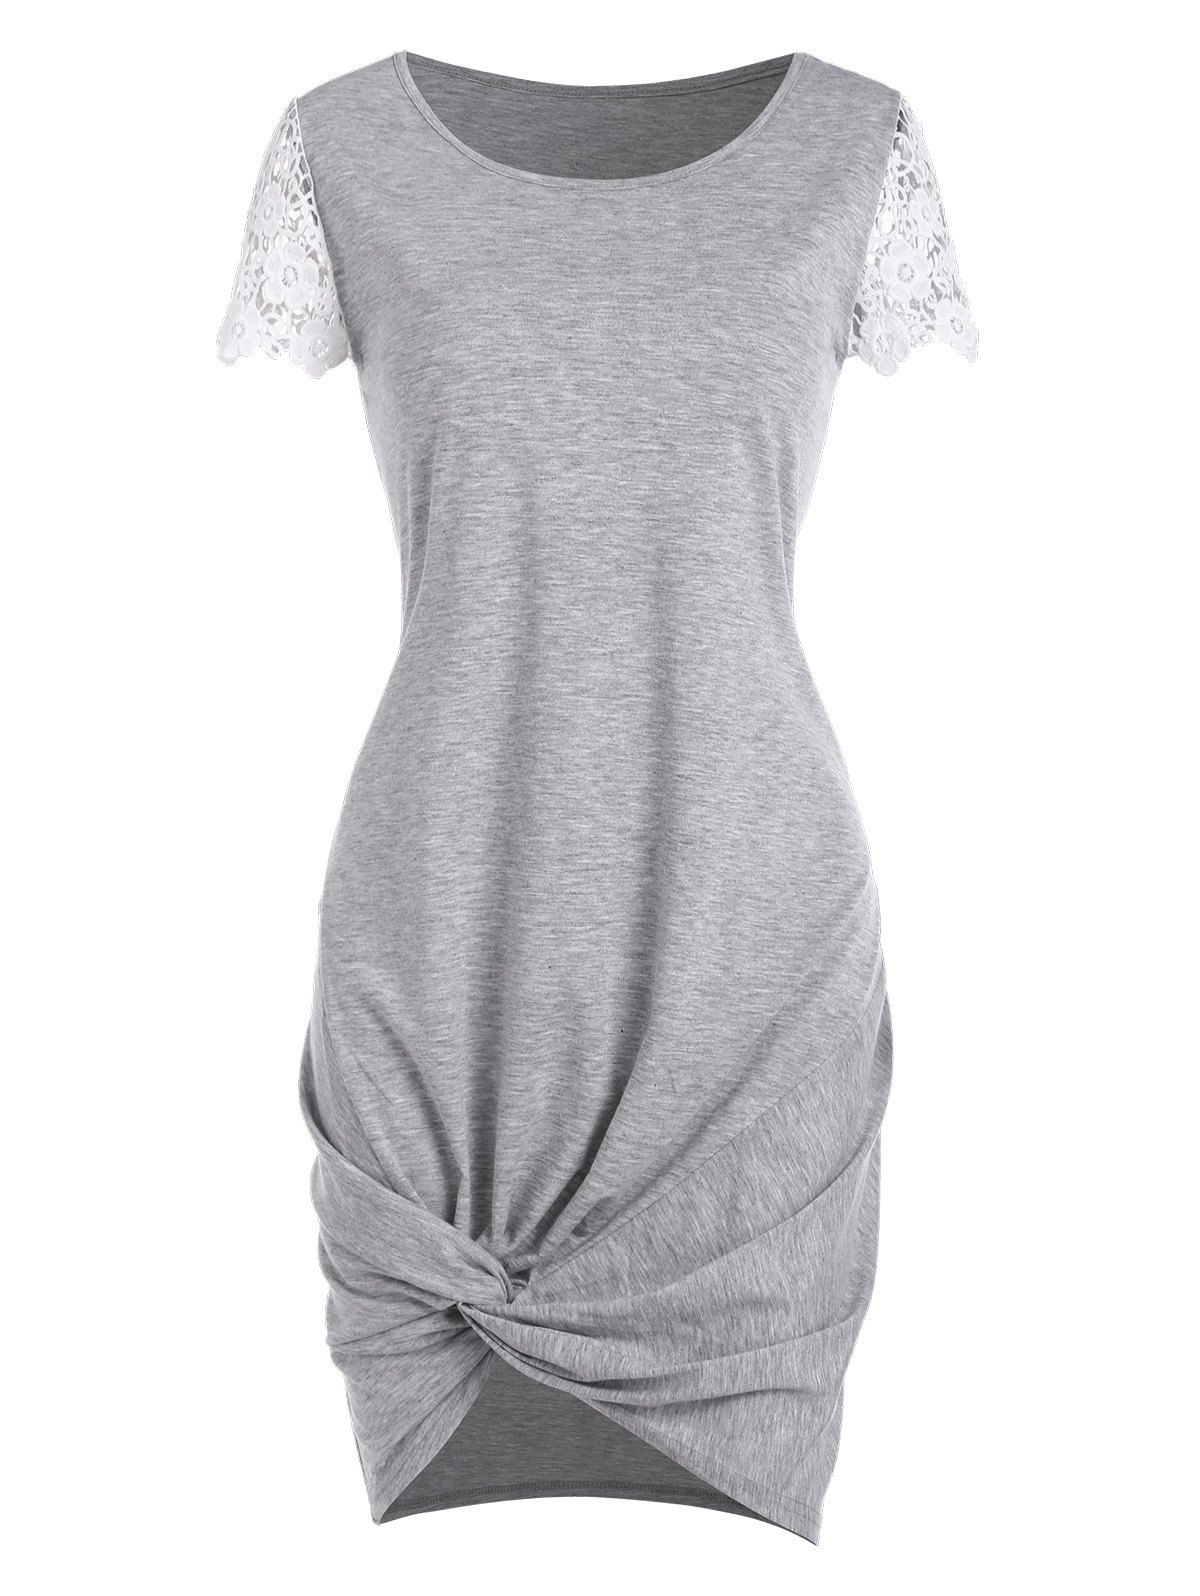 Floral Crochet Twisted Tee Dress - LIGHT GRAY S